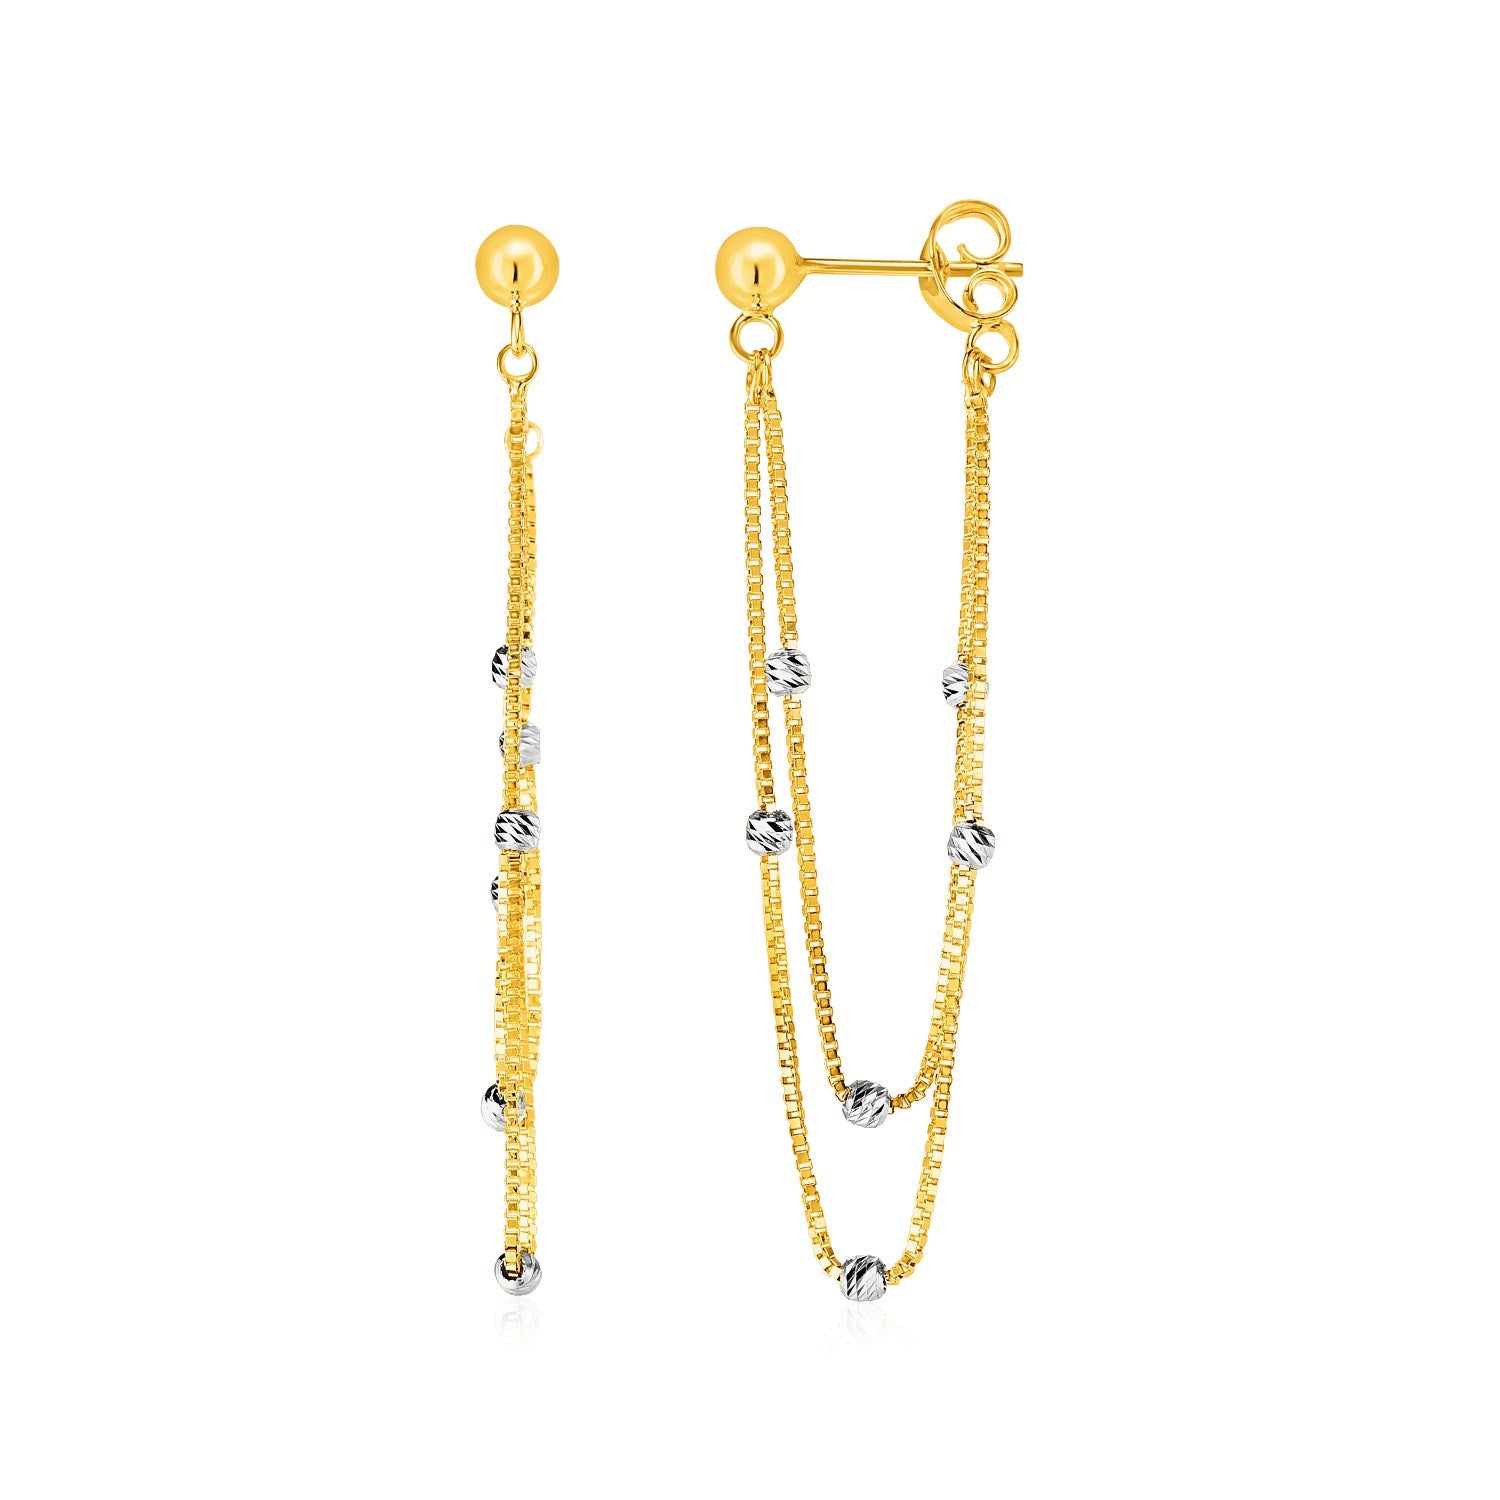 Hanging Chain Post Earrings with Bead Accents in 14k Yellow and